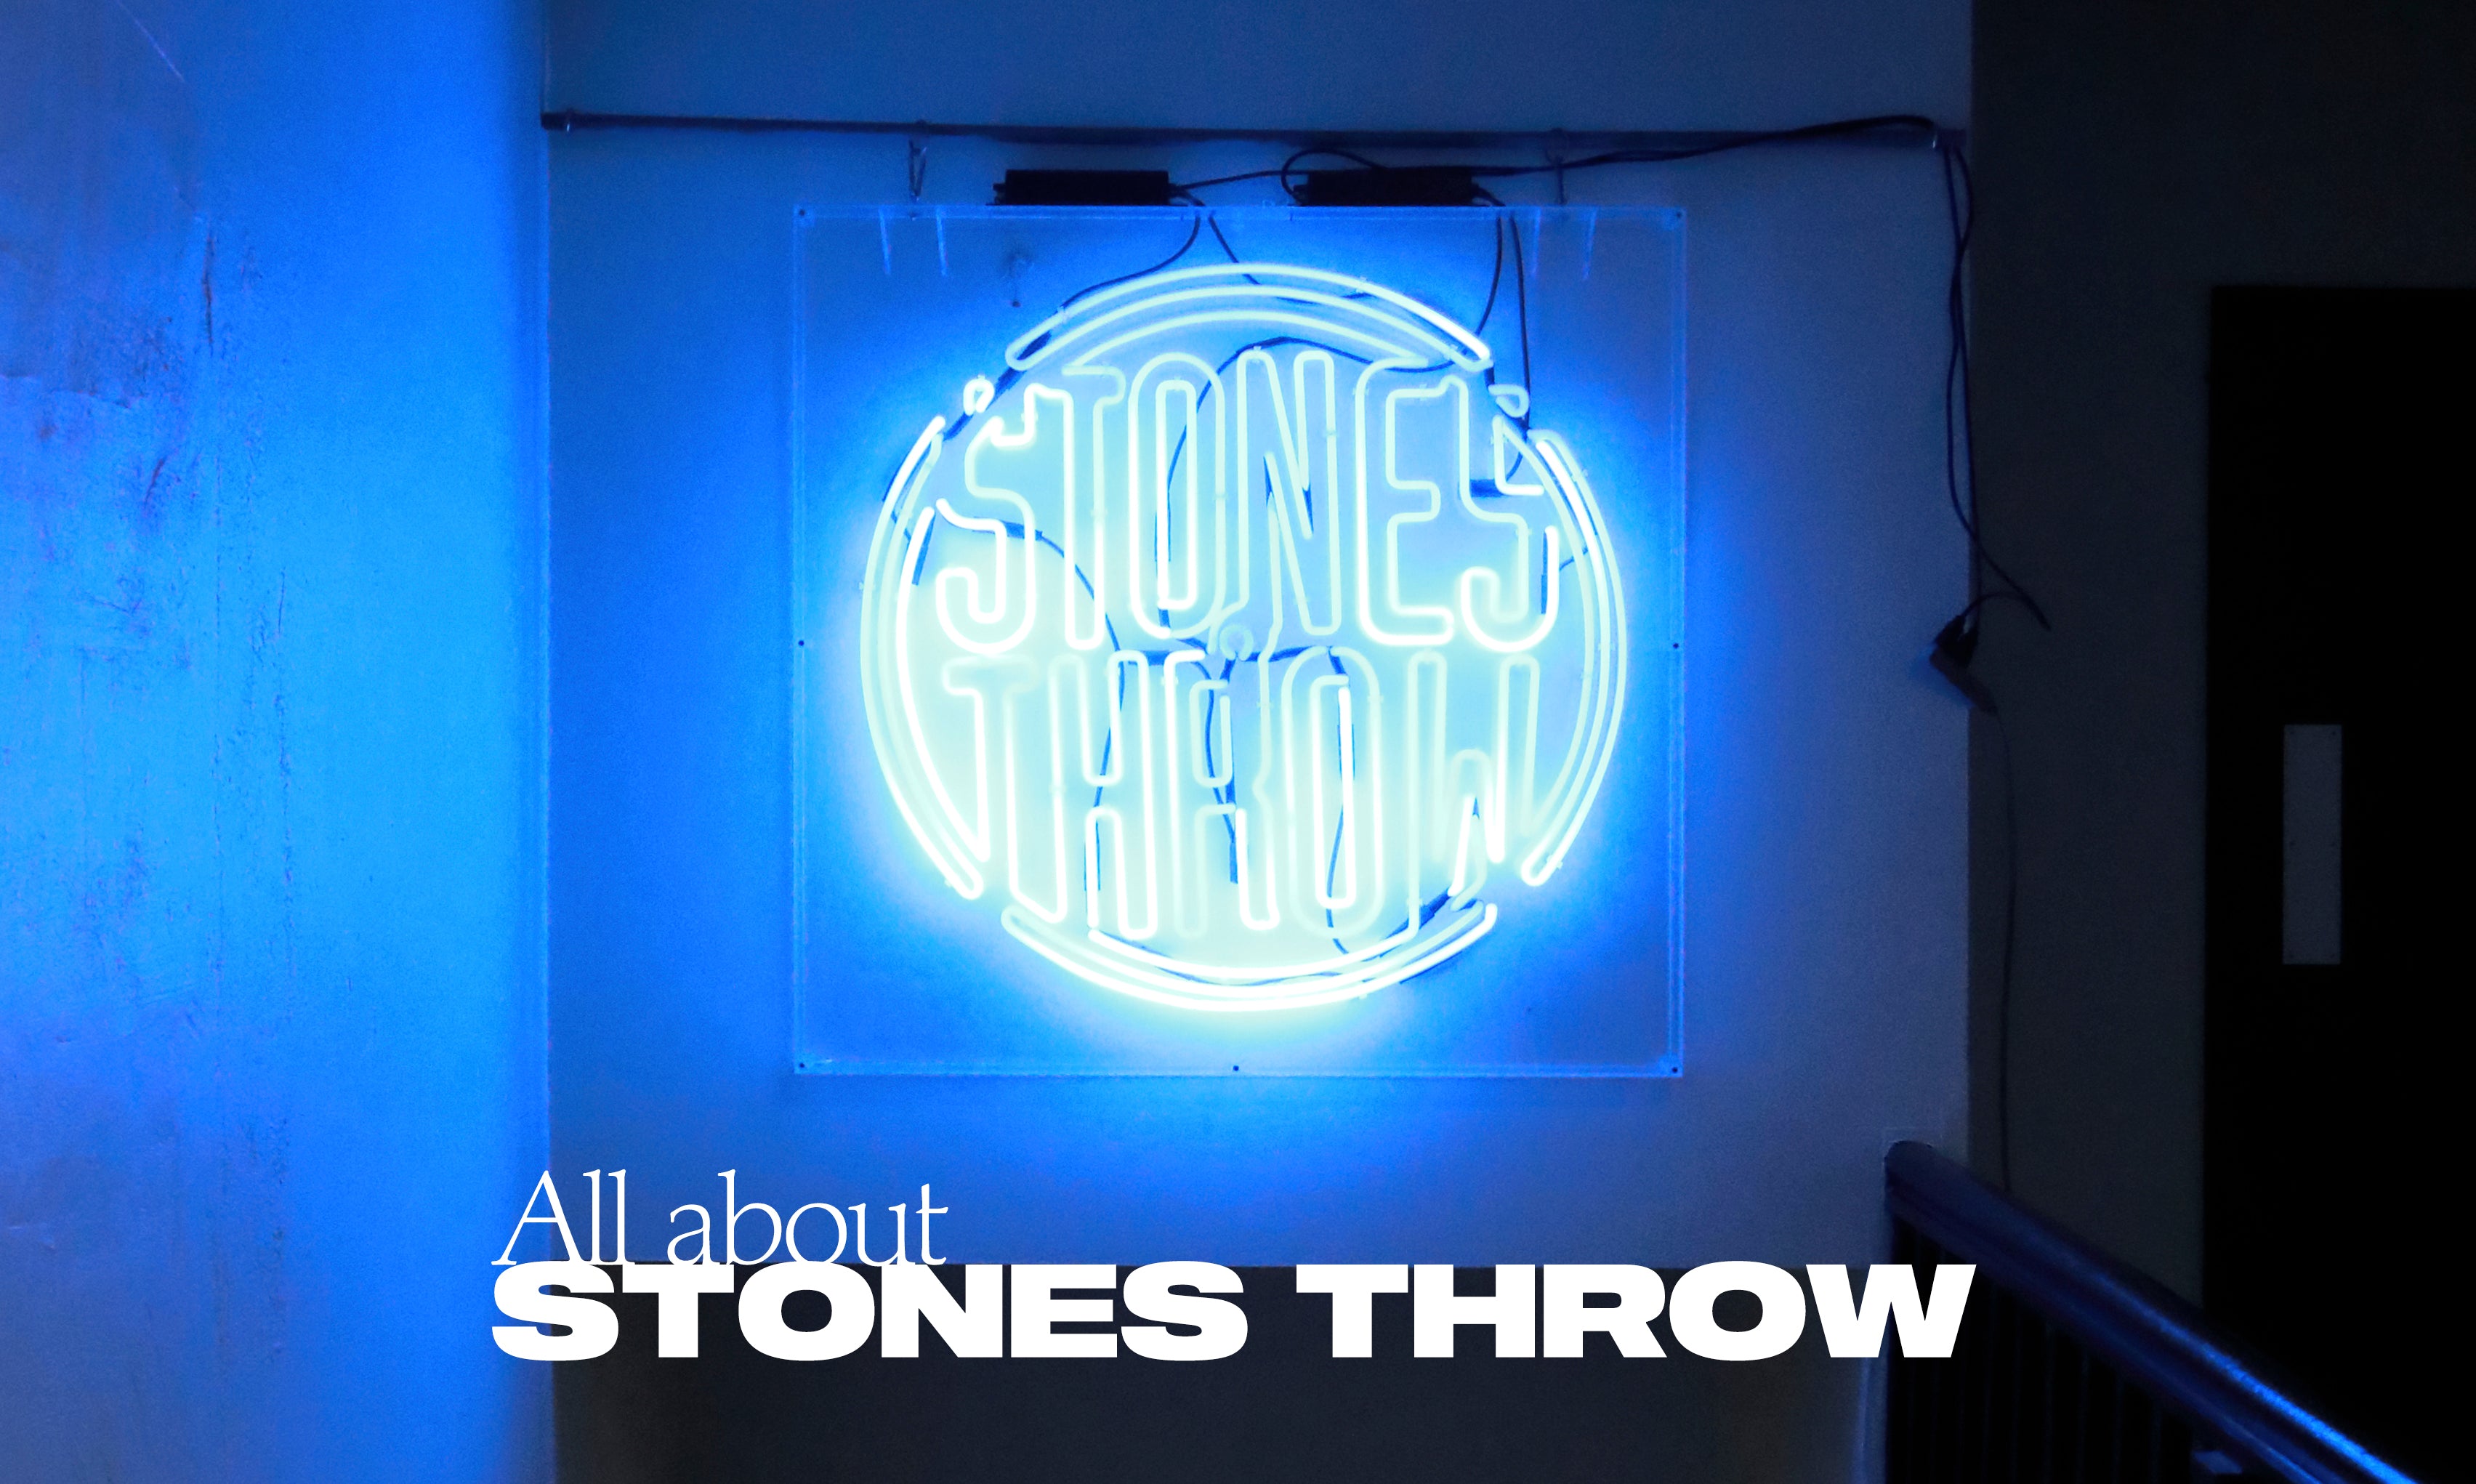 KNOW THE LEDGE / ALL ABOUT STONES THROW – UNION TOKYO